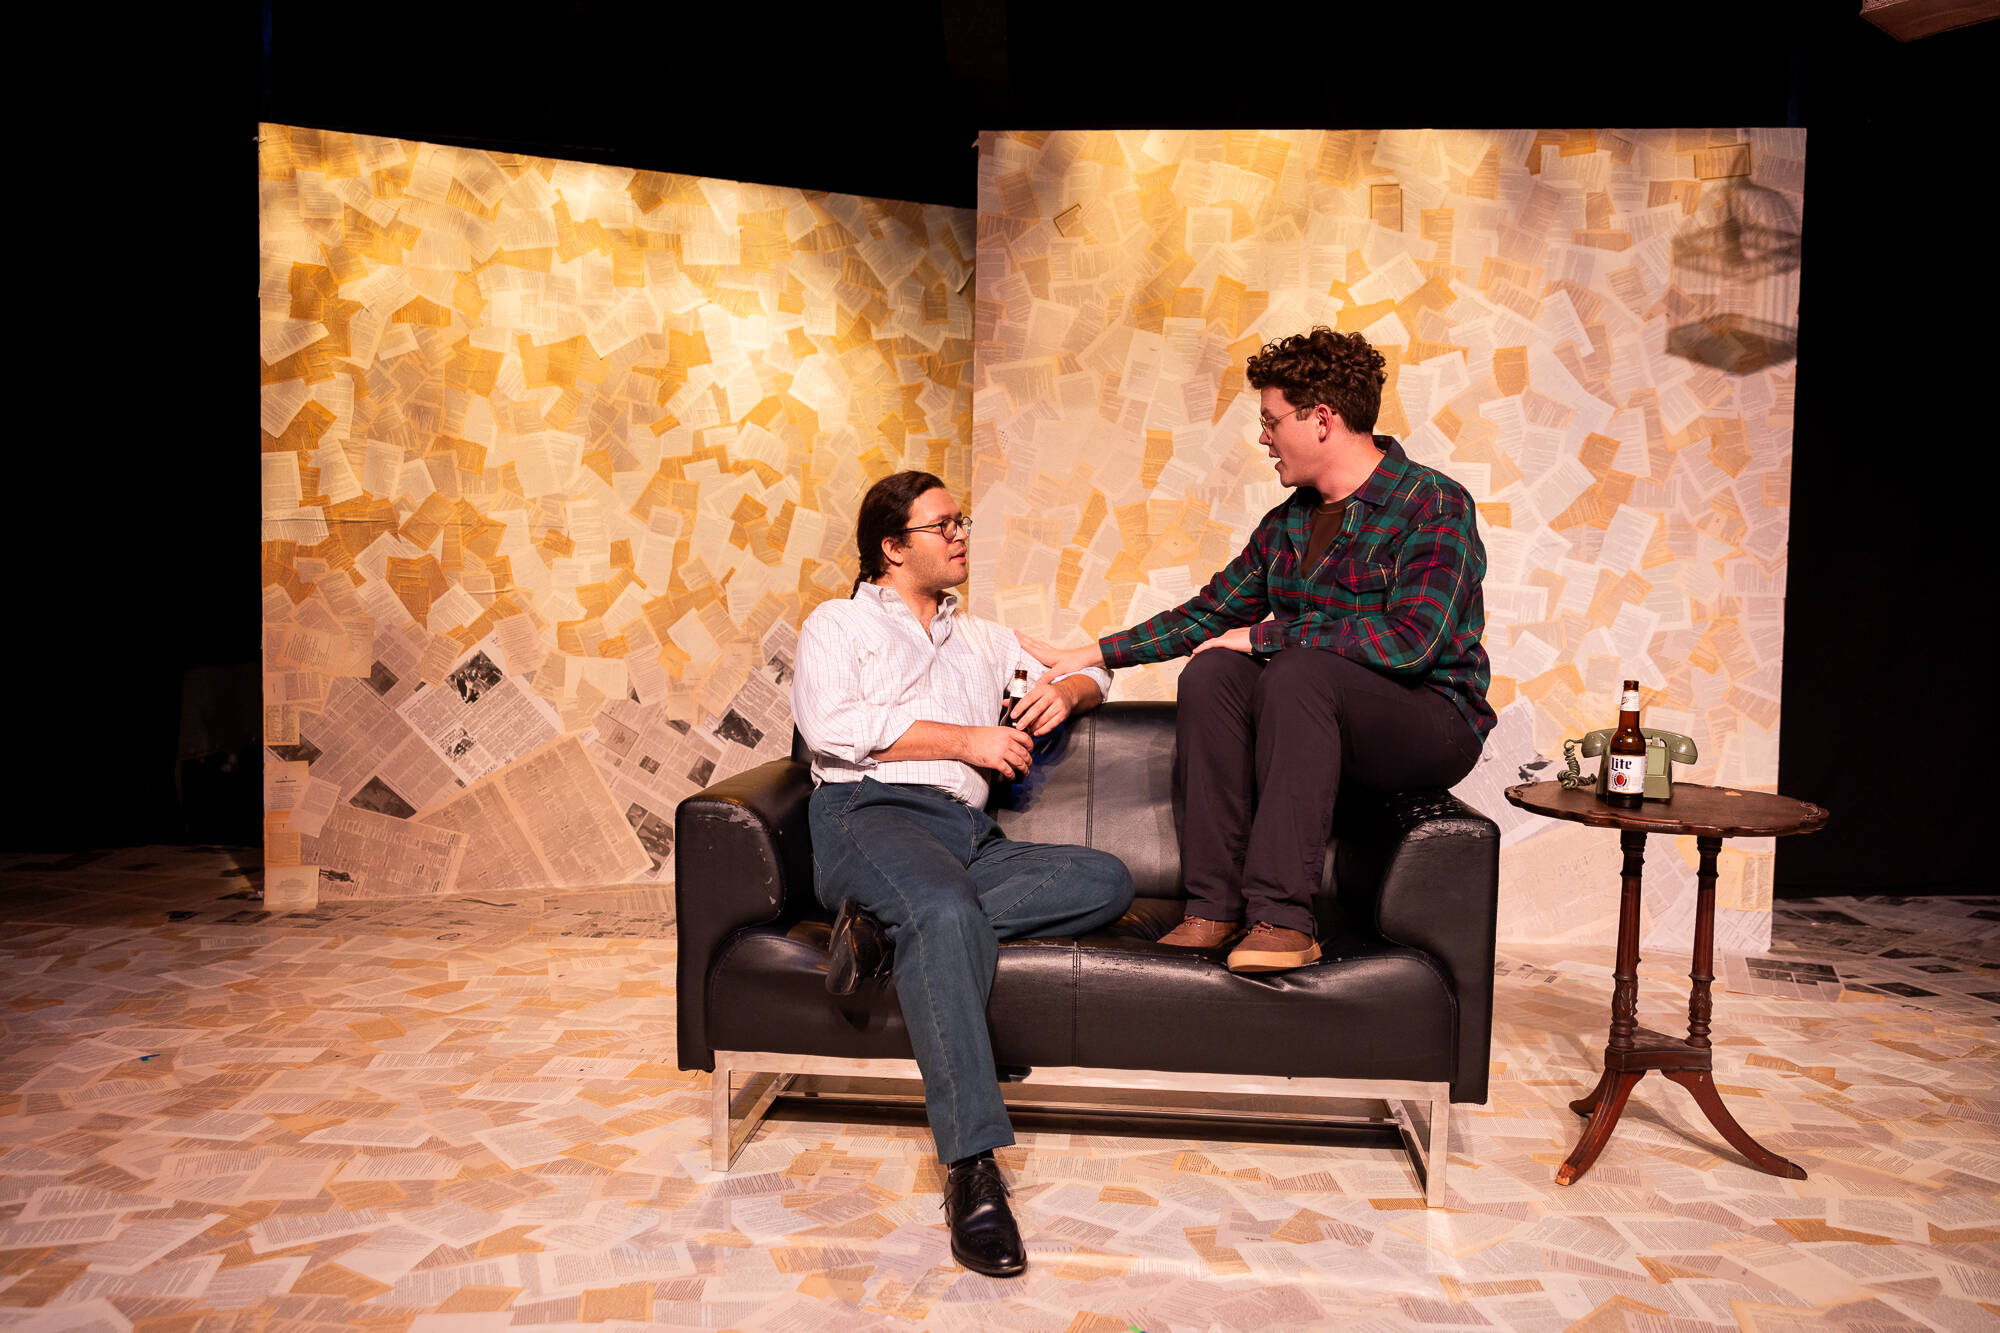 Chingwe Padraig Sullivan and Dylan C. Wack talk on the couch. (Courtesy Niles Scott Studios)